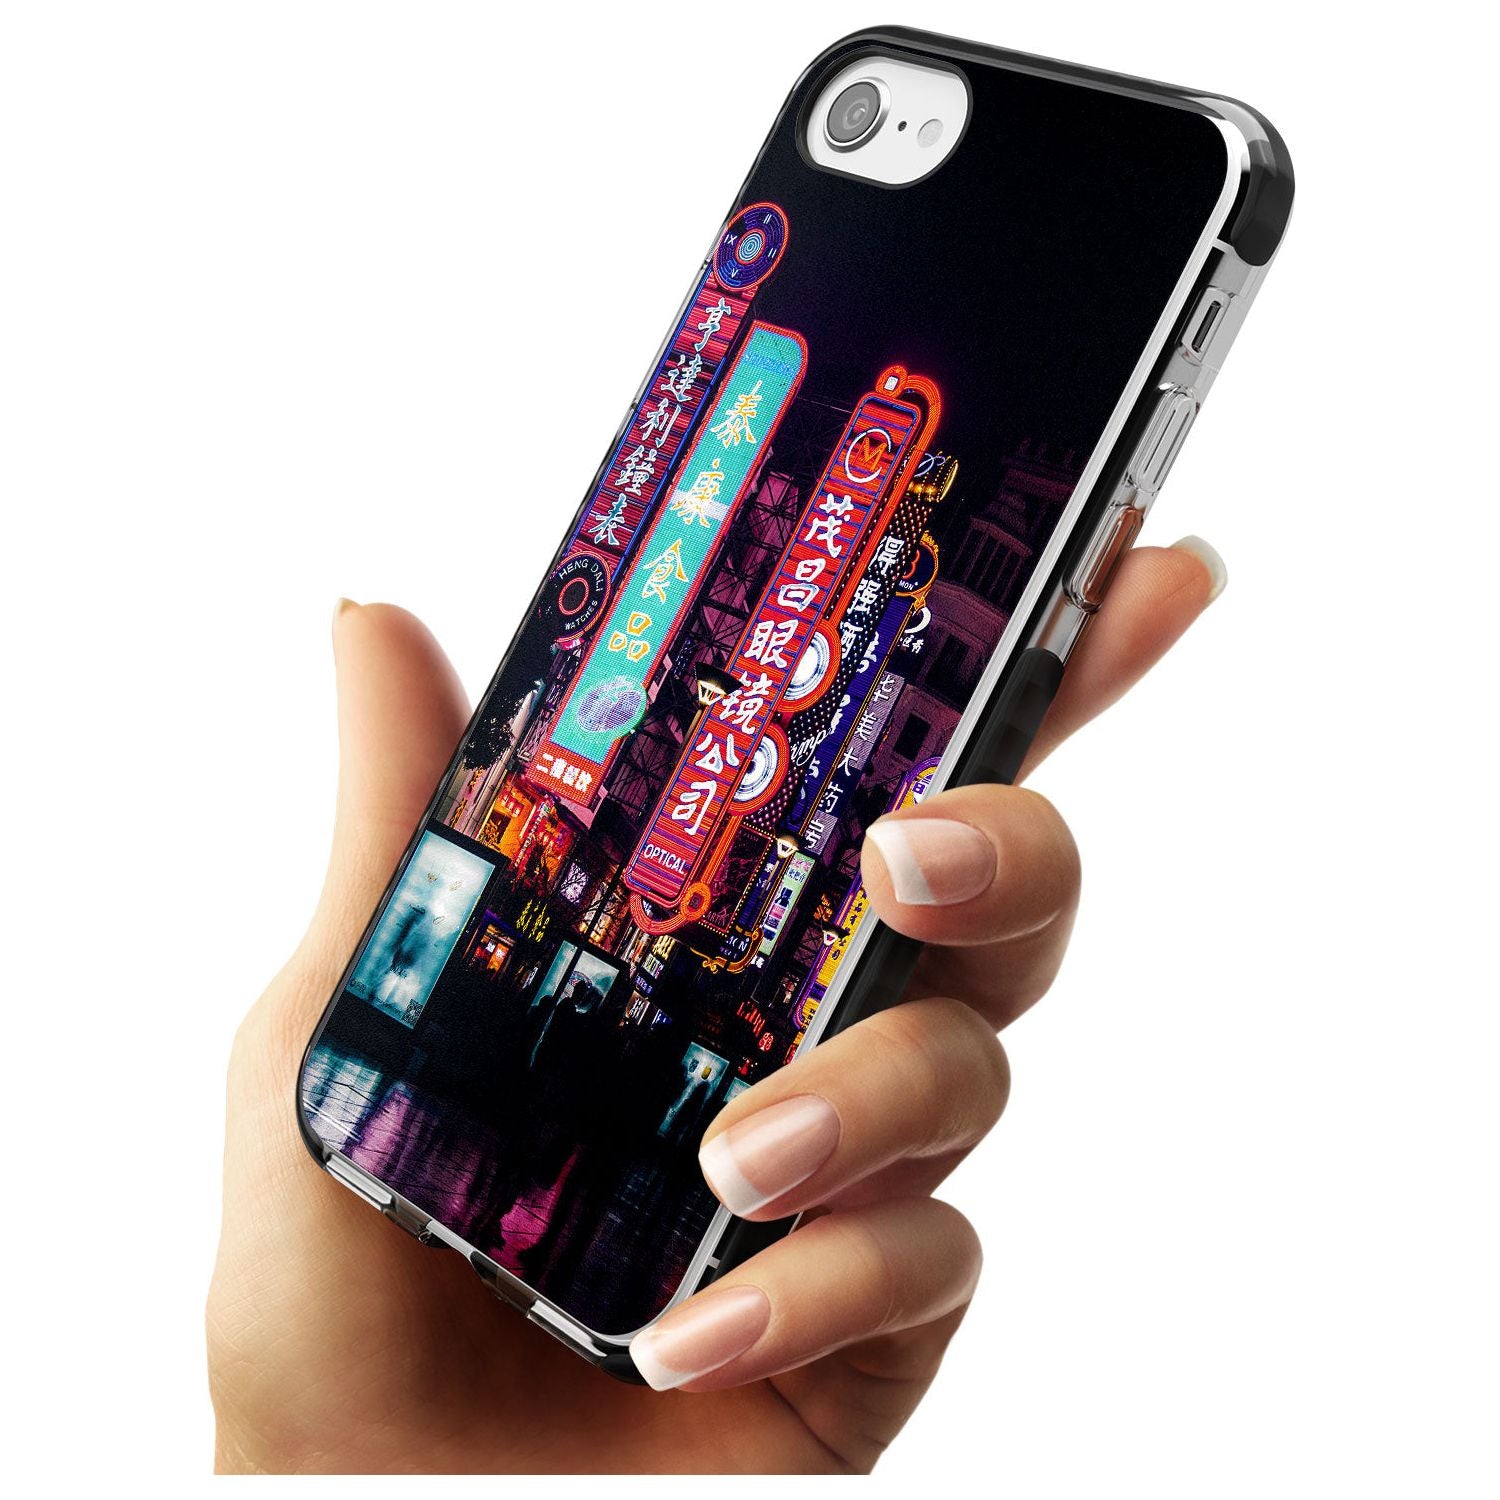 Busy Street - Neon Cities Photographs Black Impact Phone Case for iPhone SE 8 7 Plus